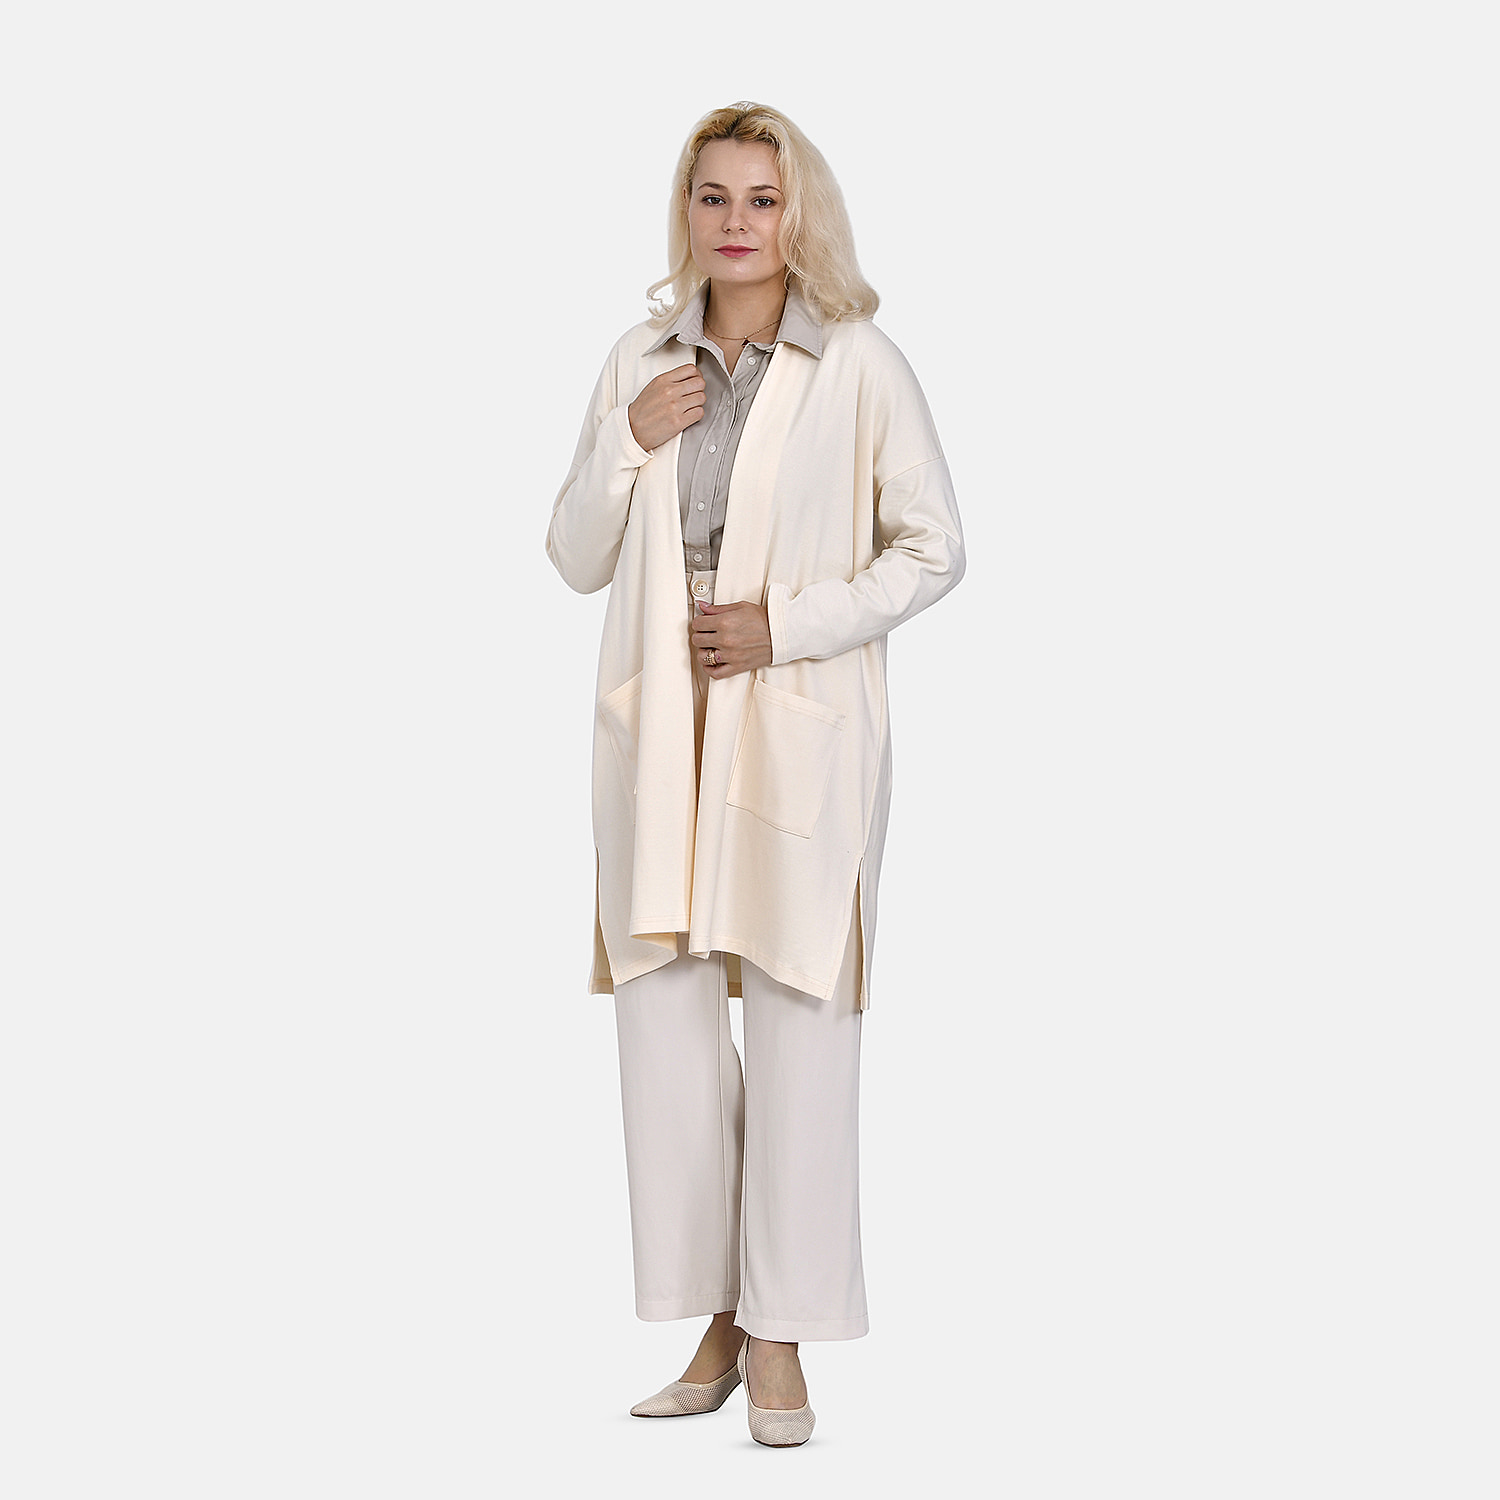 Tamsy 60% Cotton Blend Jersey Cardigan (One Size, 8-20) - Cream